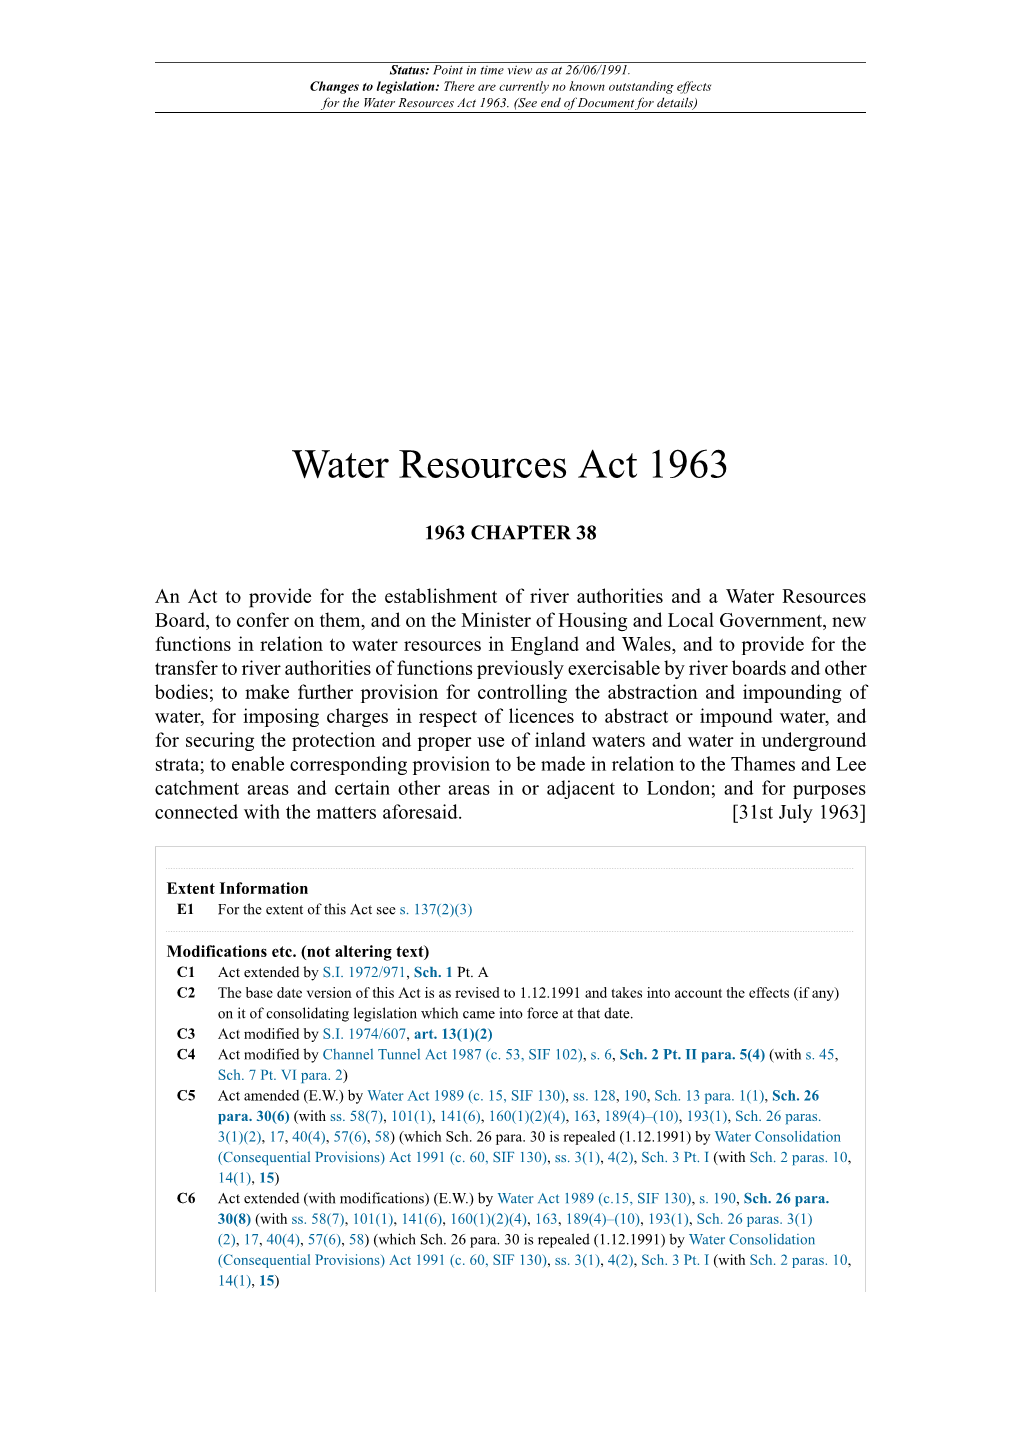 Water Resources Act 1963